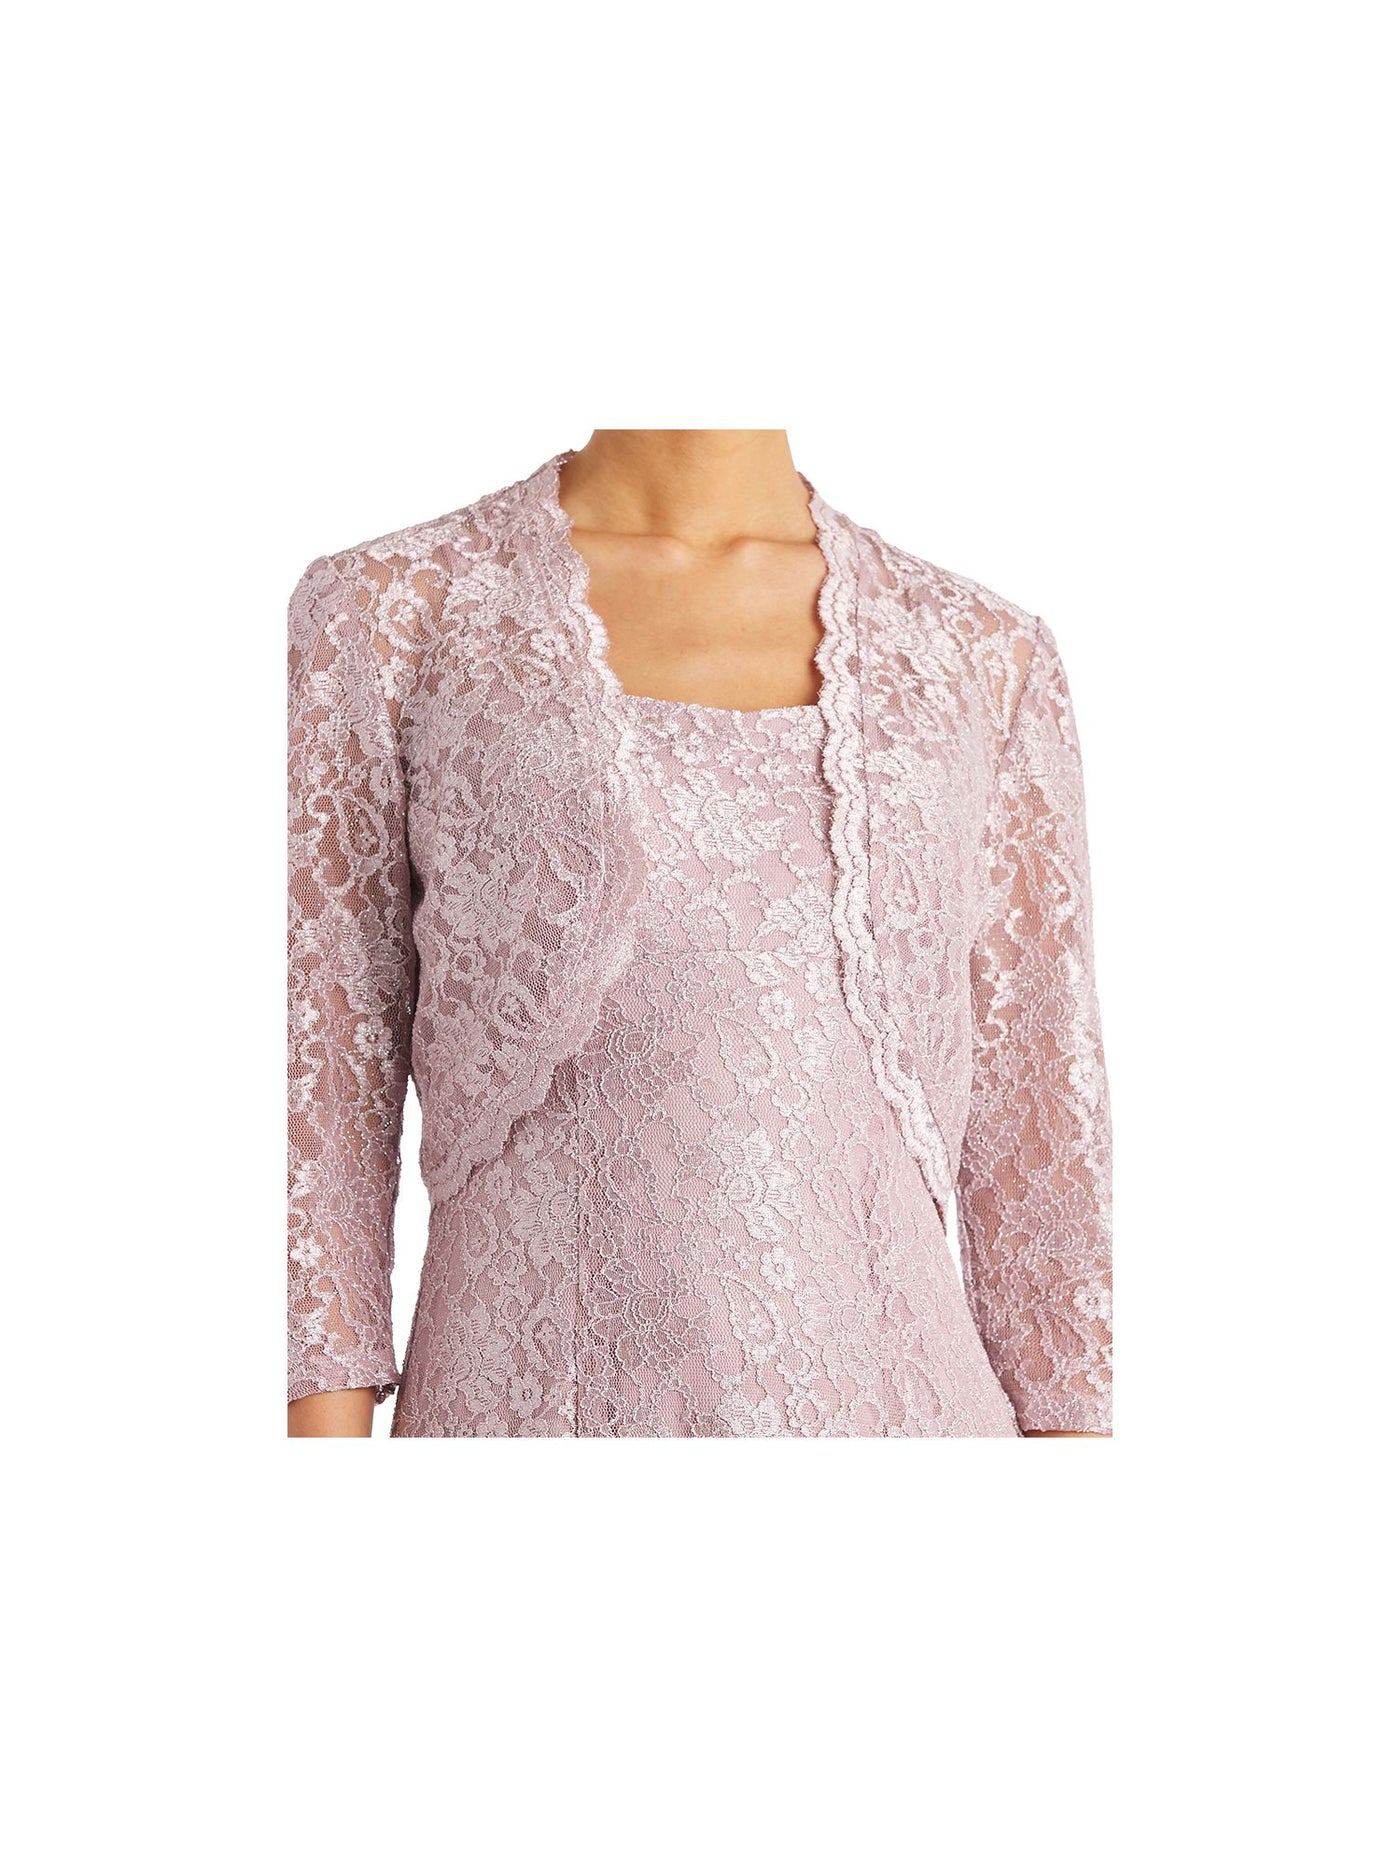 R&M RICHARDS Womens Pink Stretch Lace Glitter With Open Front Shrug Floral Sleeveless Square Neck Full-Length Formal Gown Dress Petites 8P